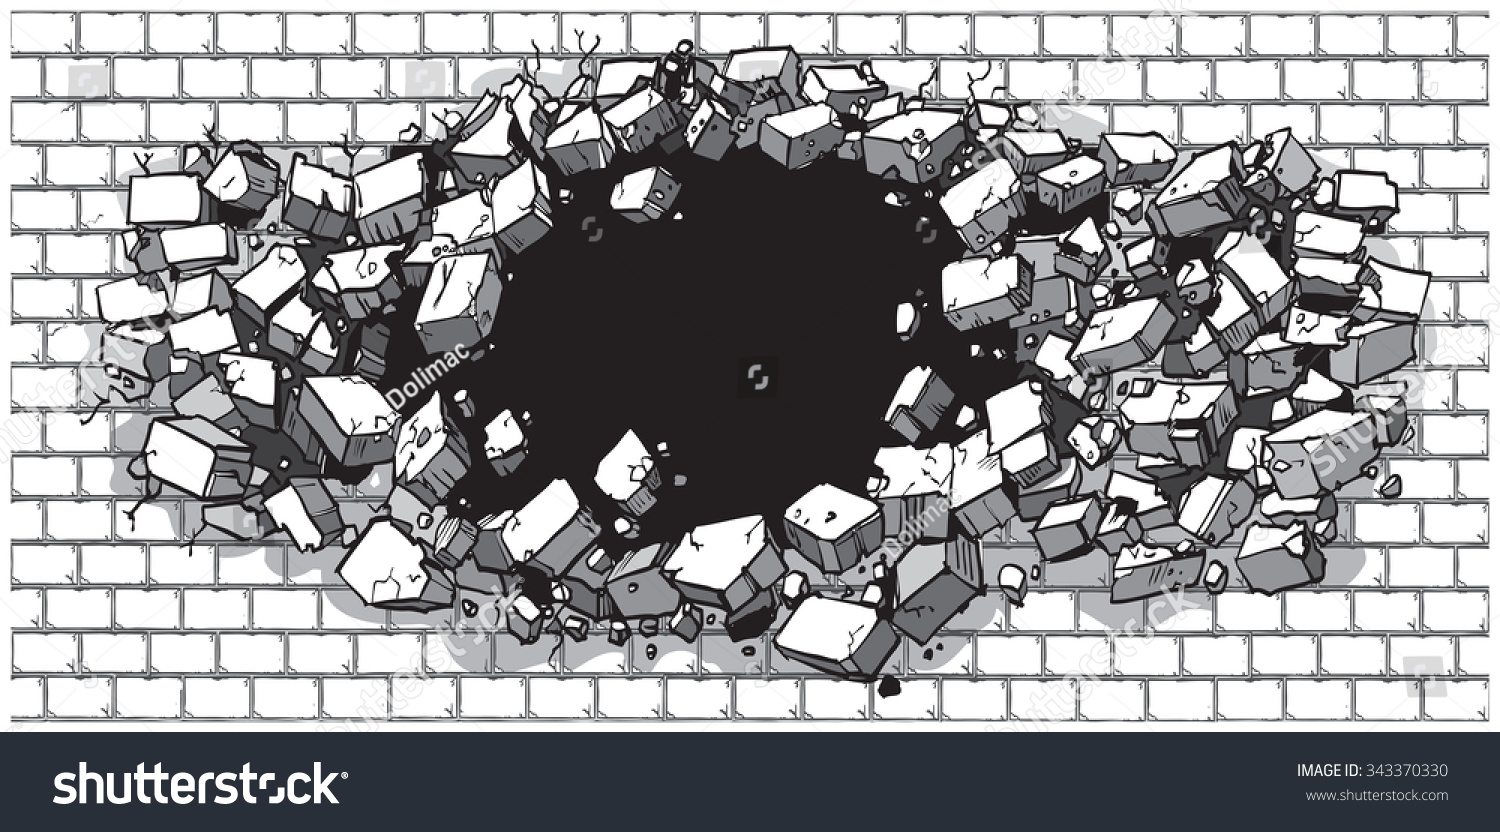 Cartoon Clip Art Illustration Of A Hole In A Wide Brick Or Cinder Block